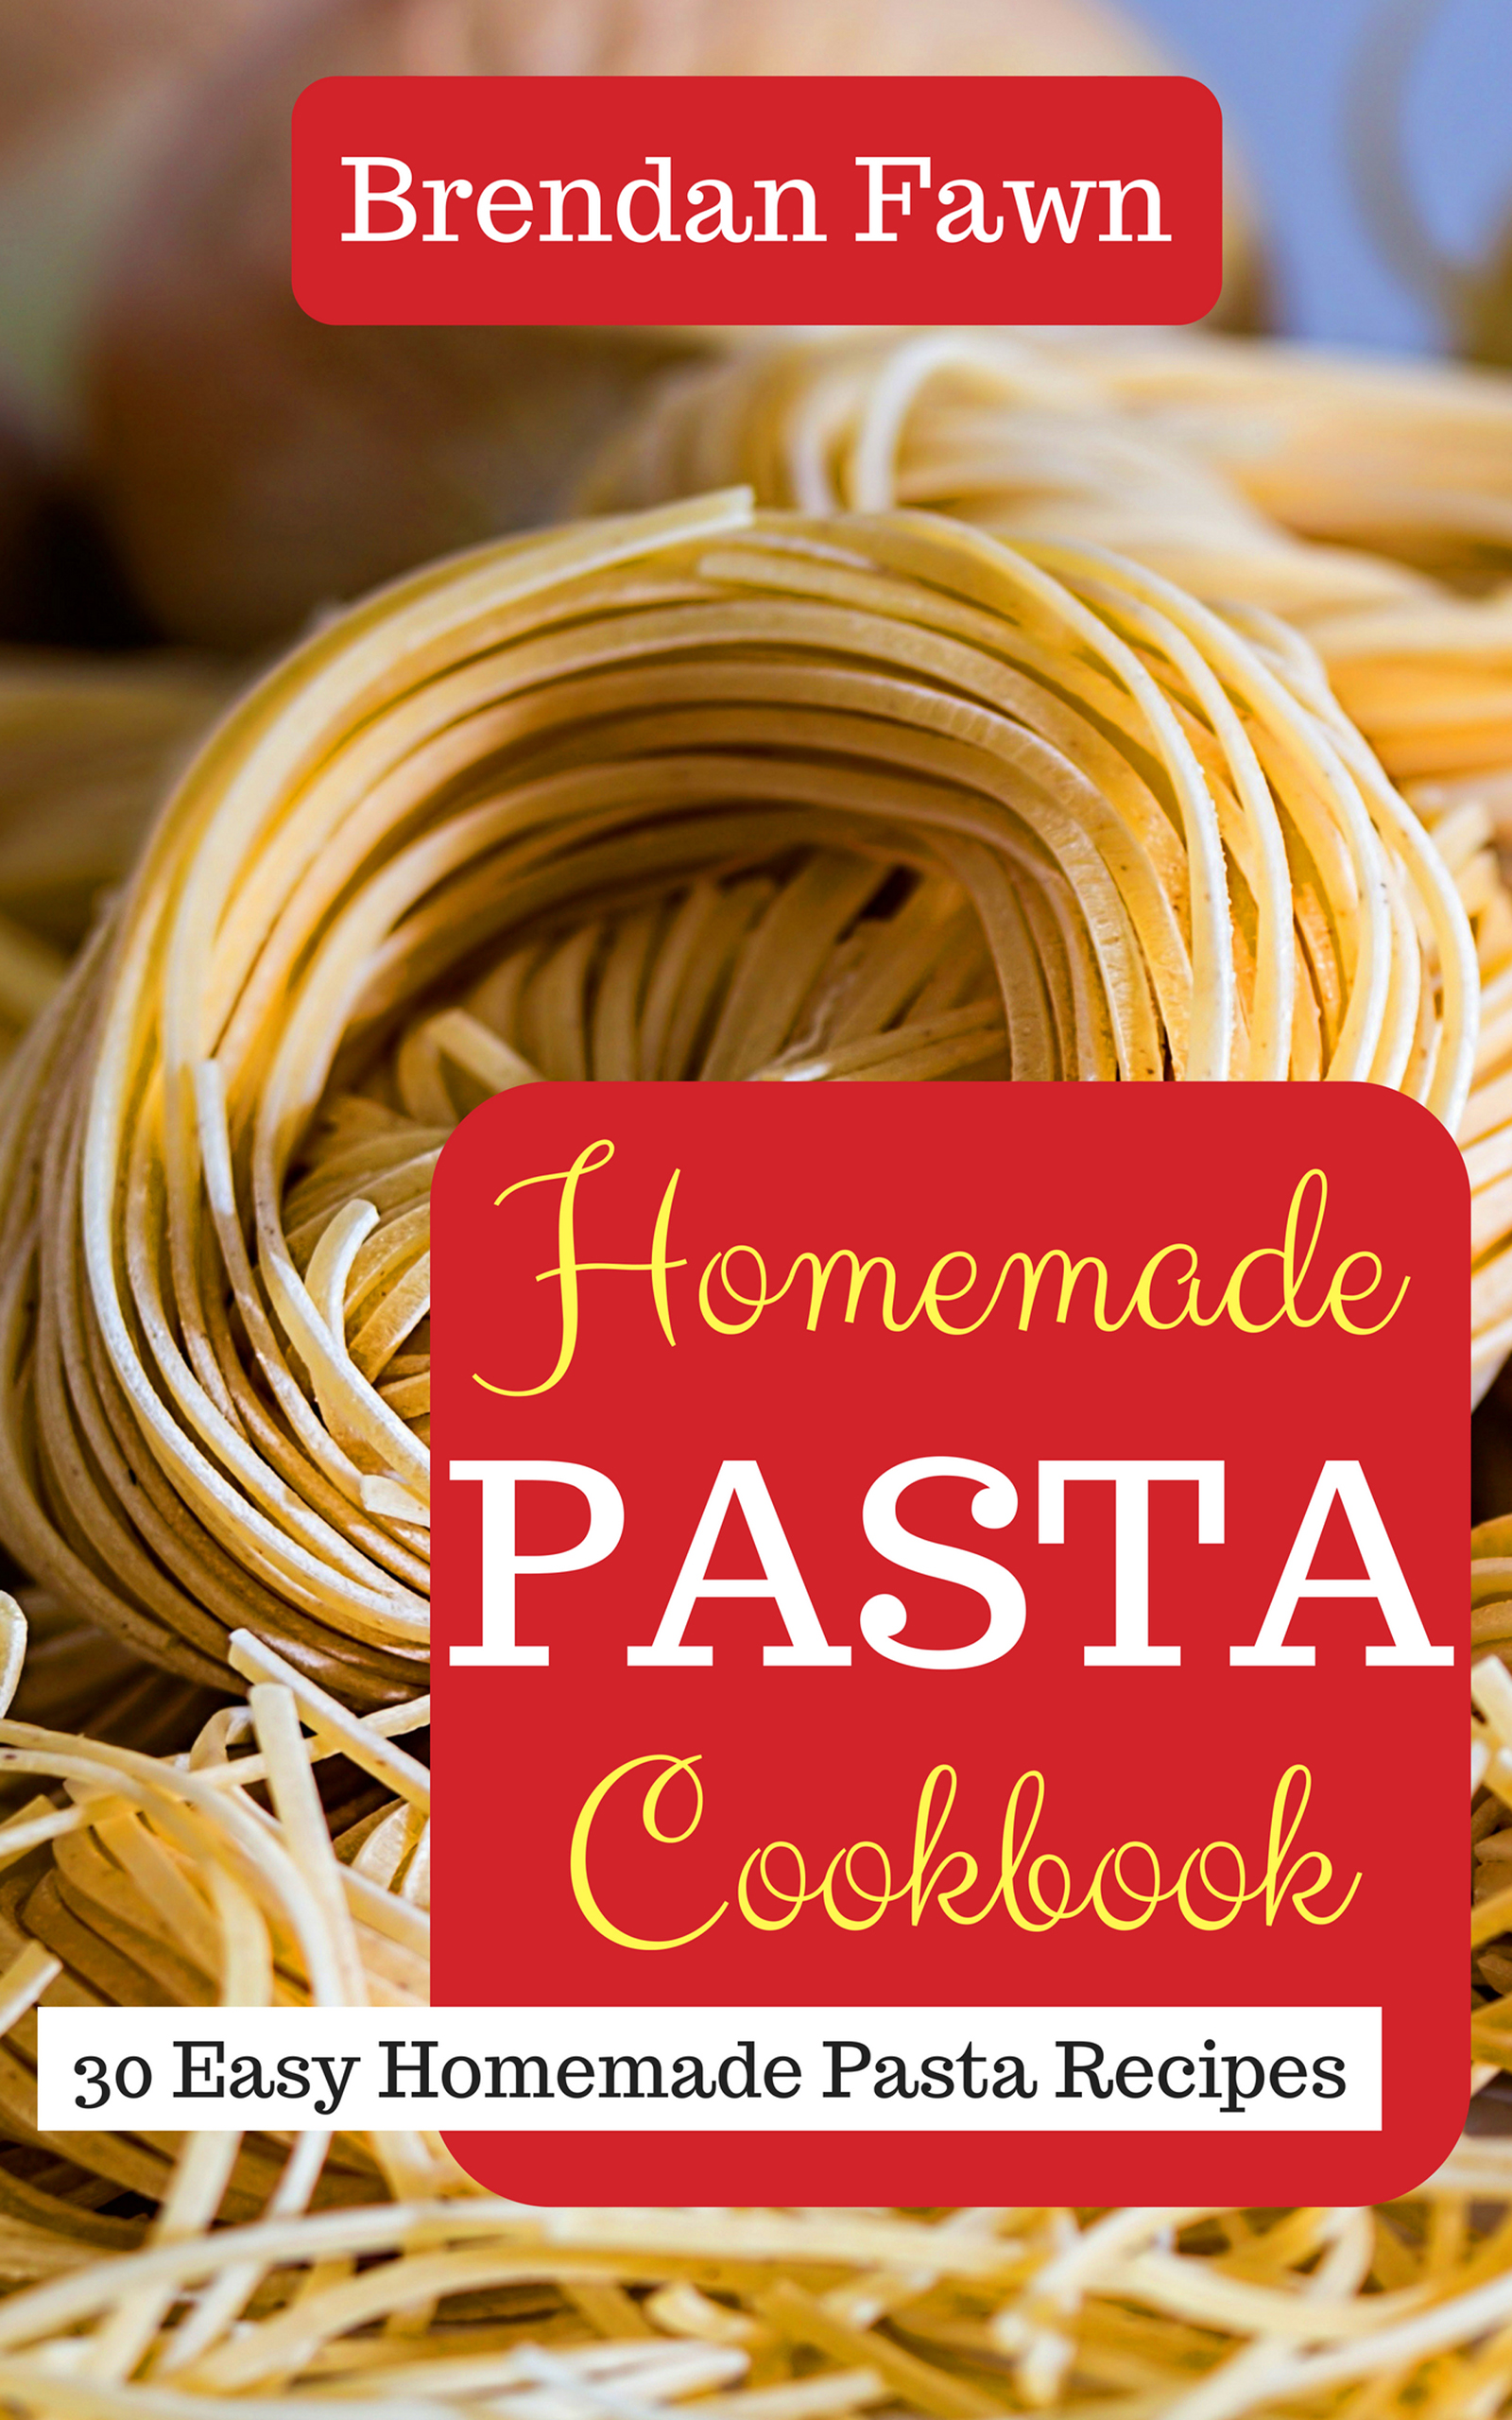 FREE: Homemade Pasta Cookbook: 30 Easy Homemade Pasta Recipes by Brendan Fawn